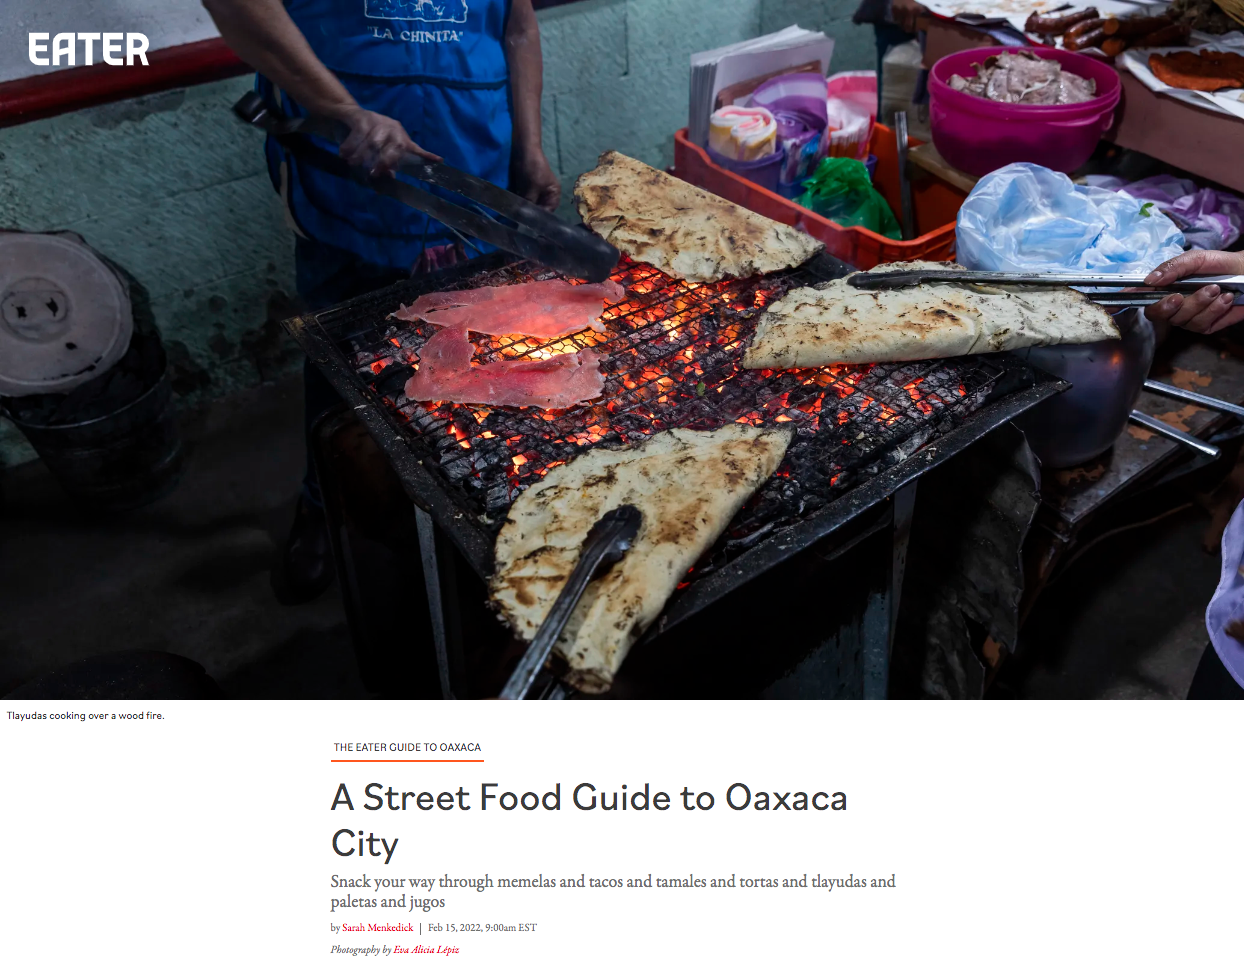 A Street Food Guide to Oaxaca City. EATER